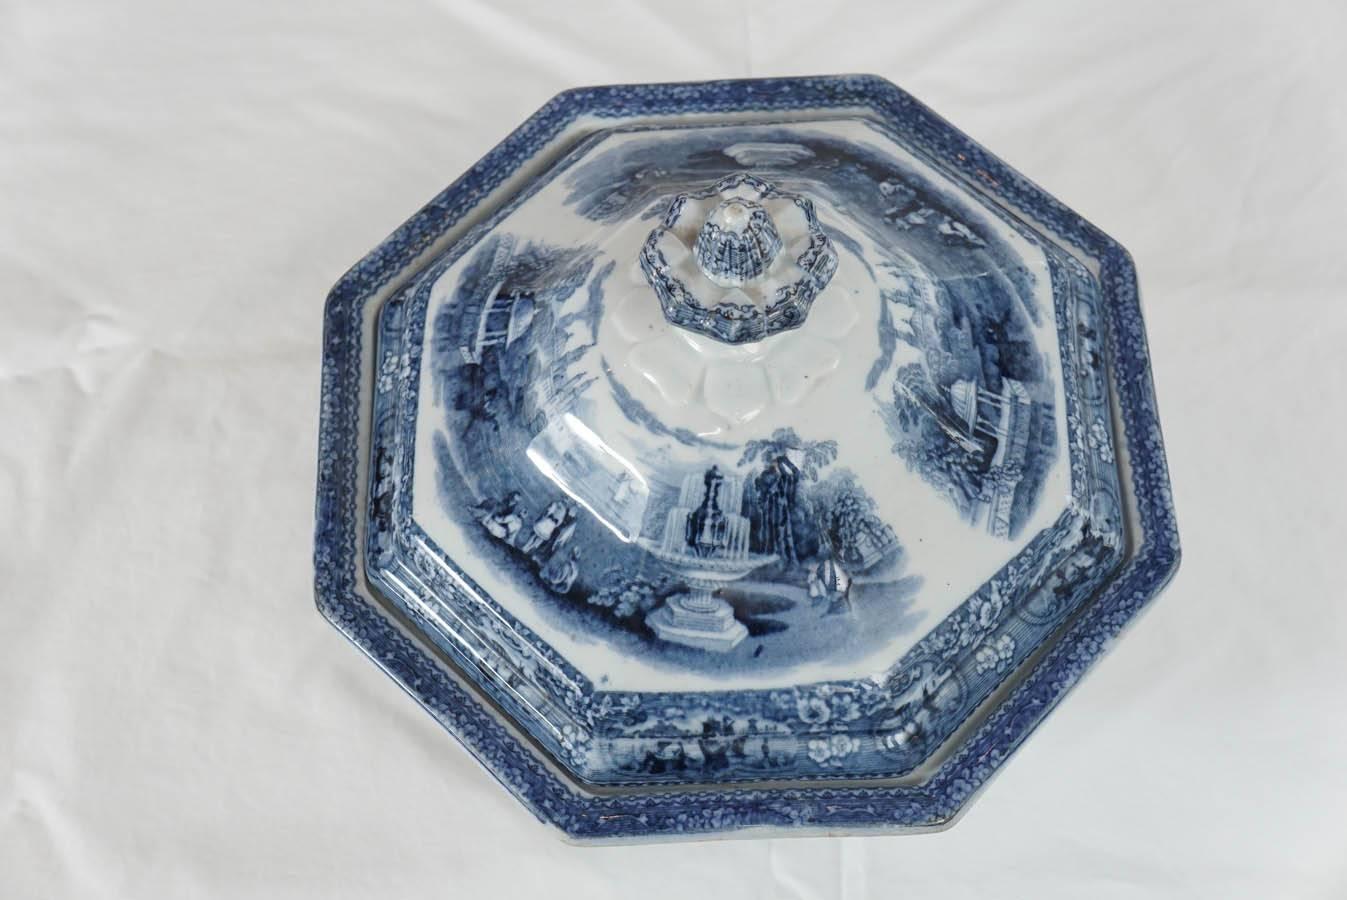 Late Victorian Staffordshire Blue & White Transfer Decorated Covered Bowl/Tureen, 19th Century